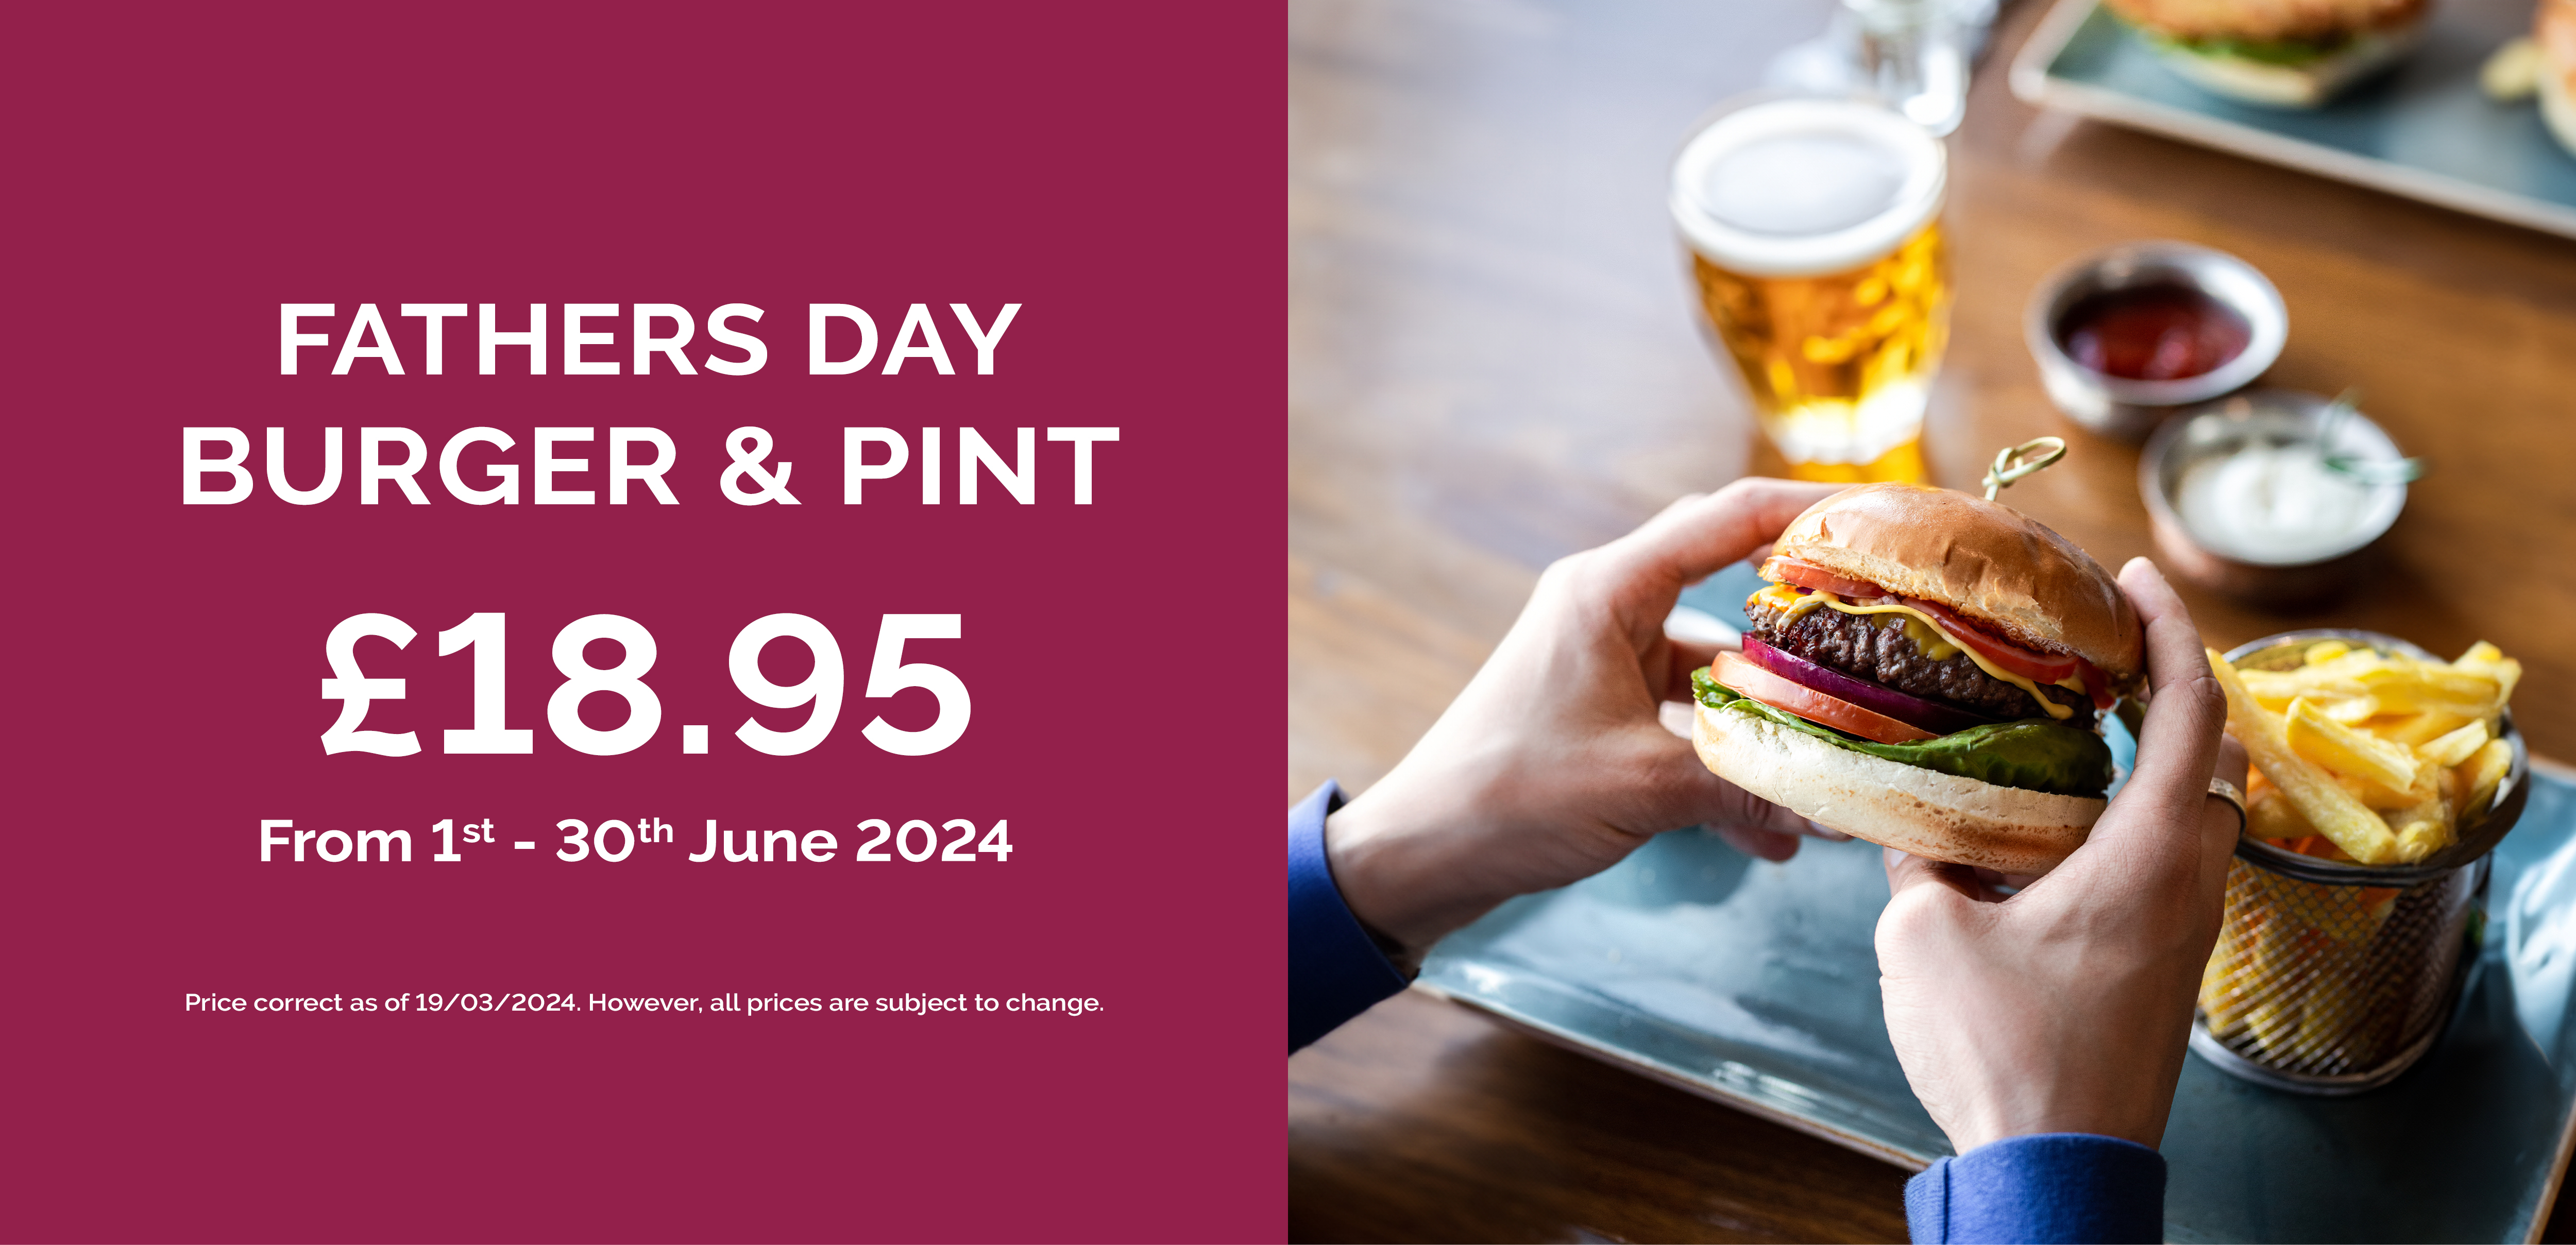 Fathers Day Lunch Burger & Pint £18.95